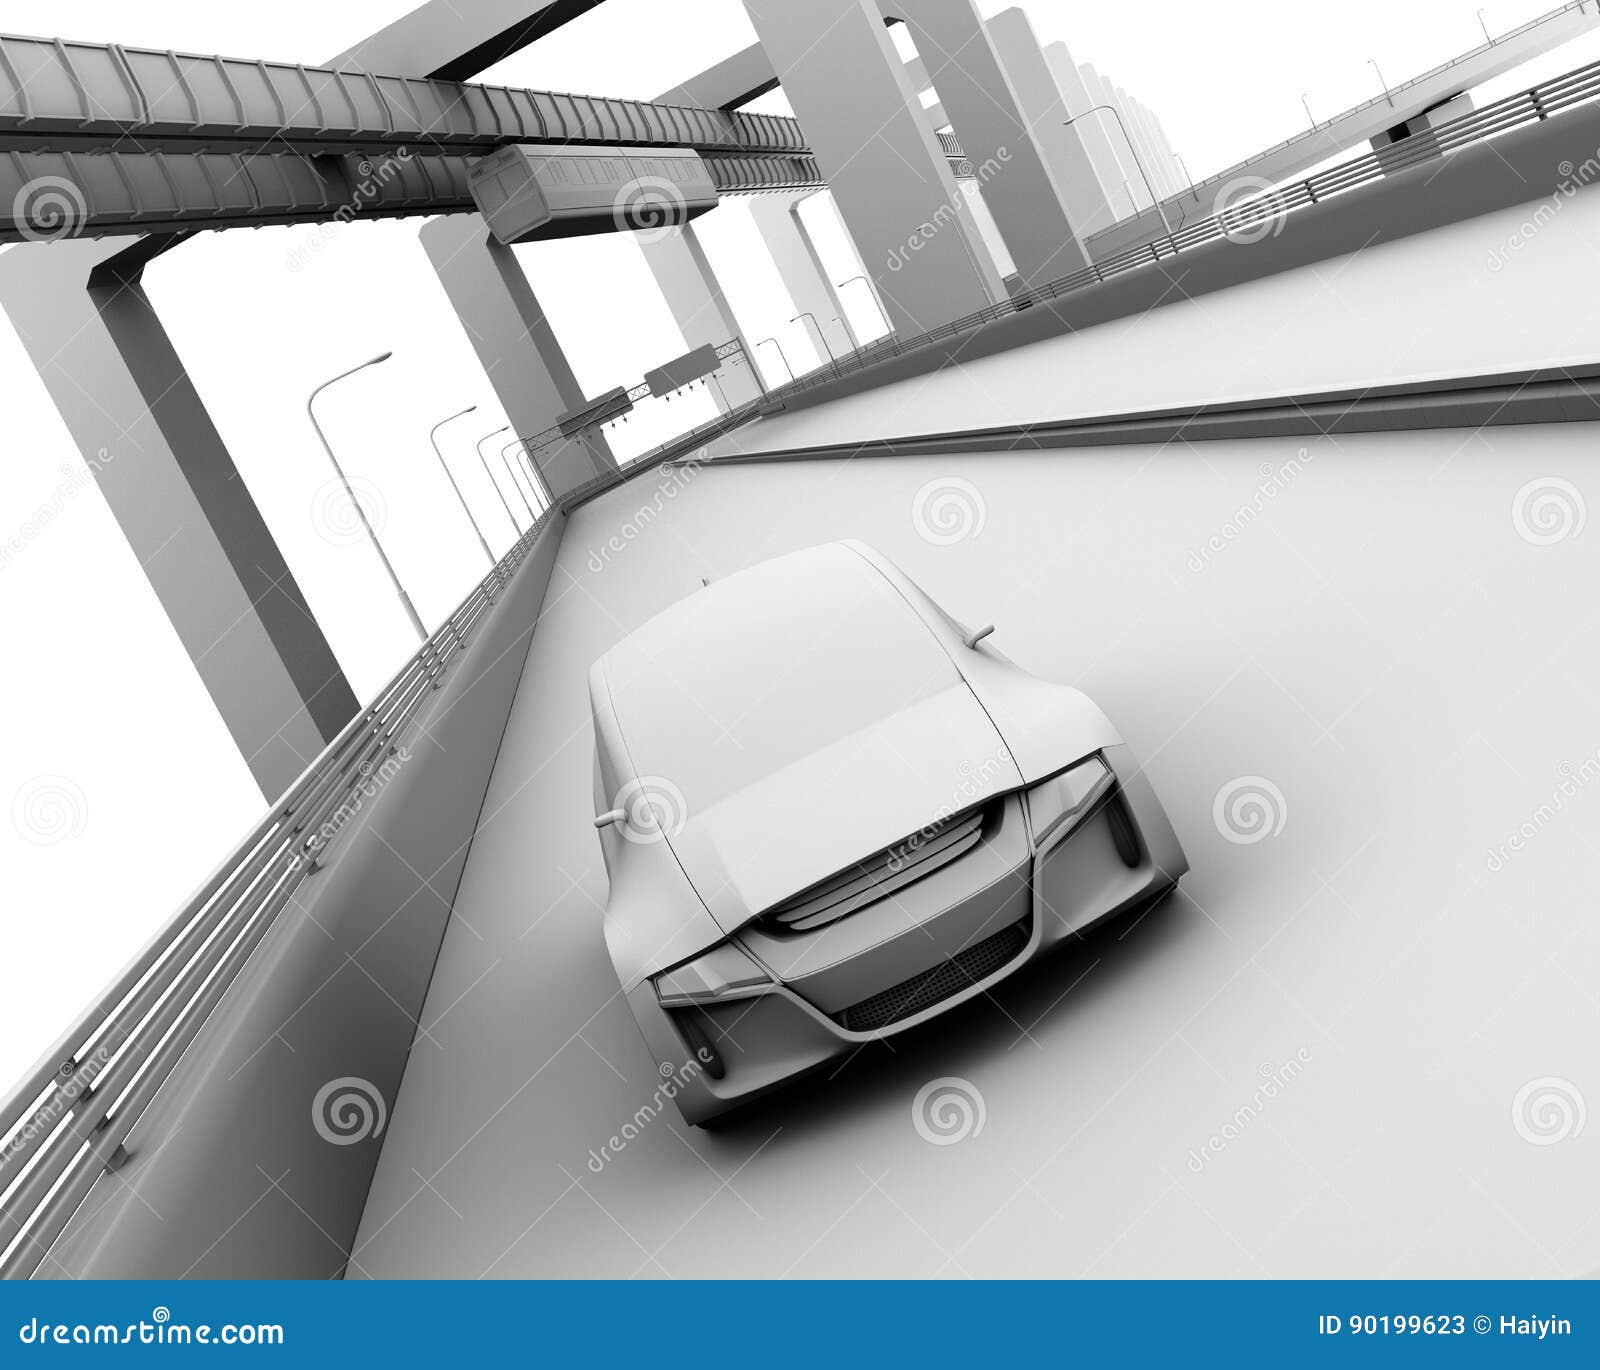 Clay model rendering of self-driving car on the highway, and monorail train on background. 3D rendering image.